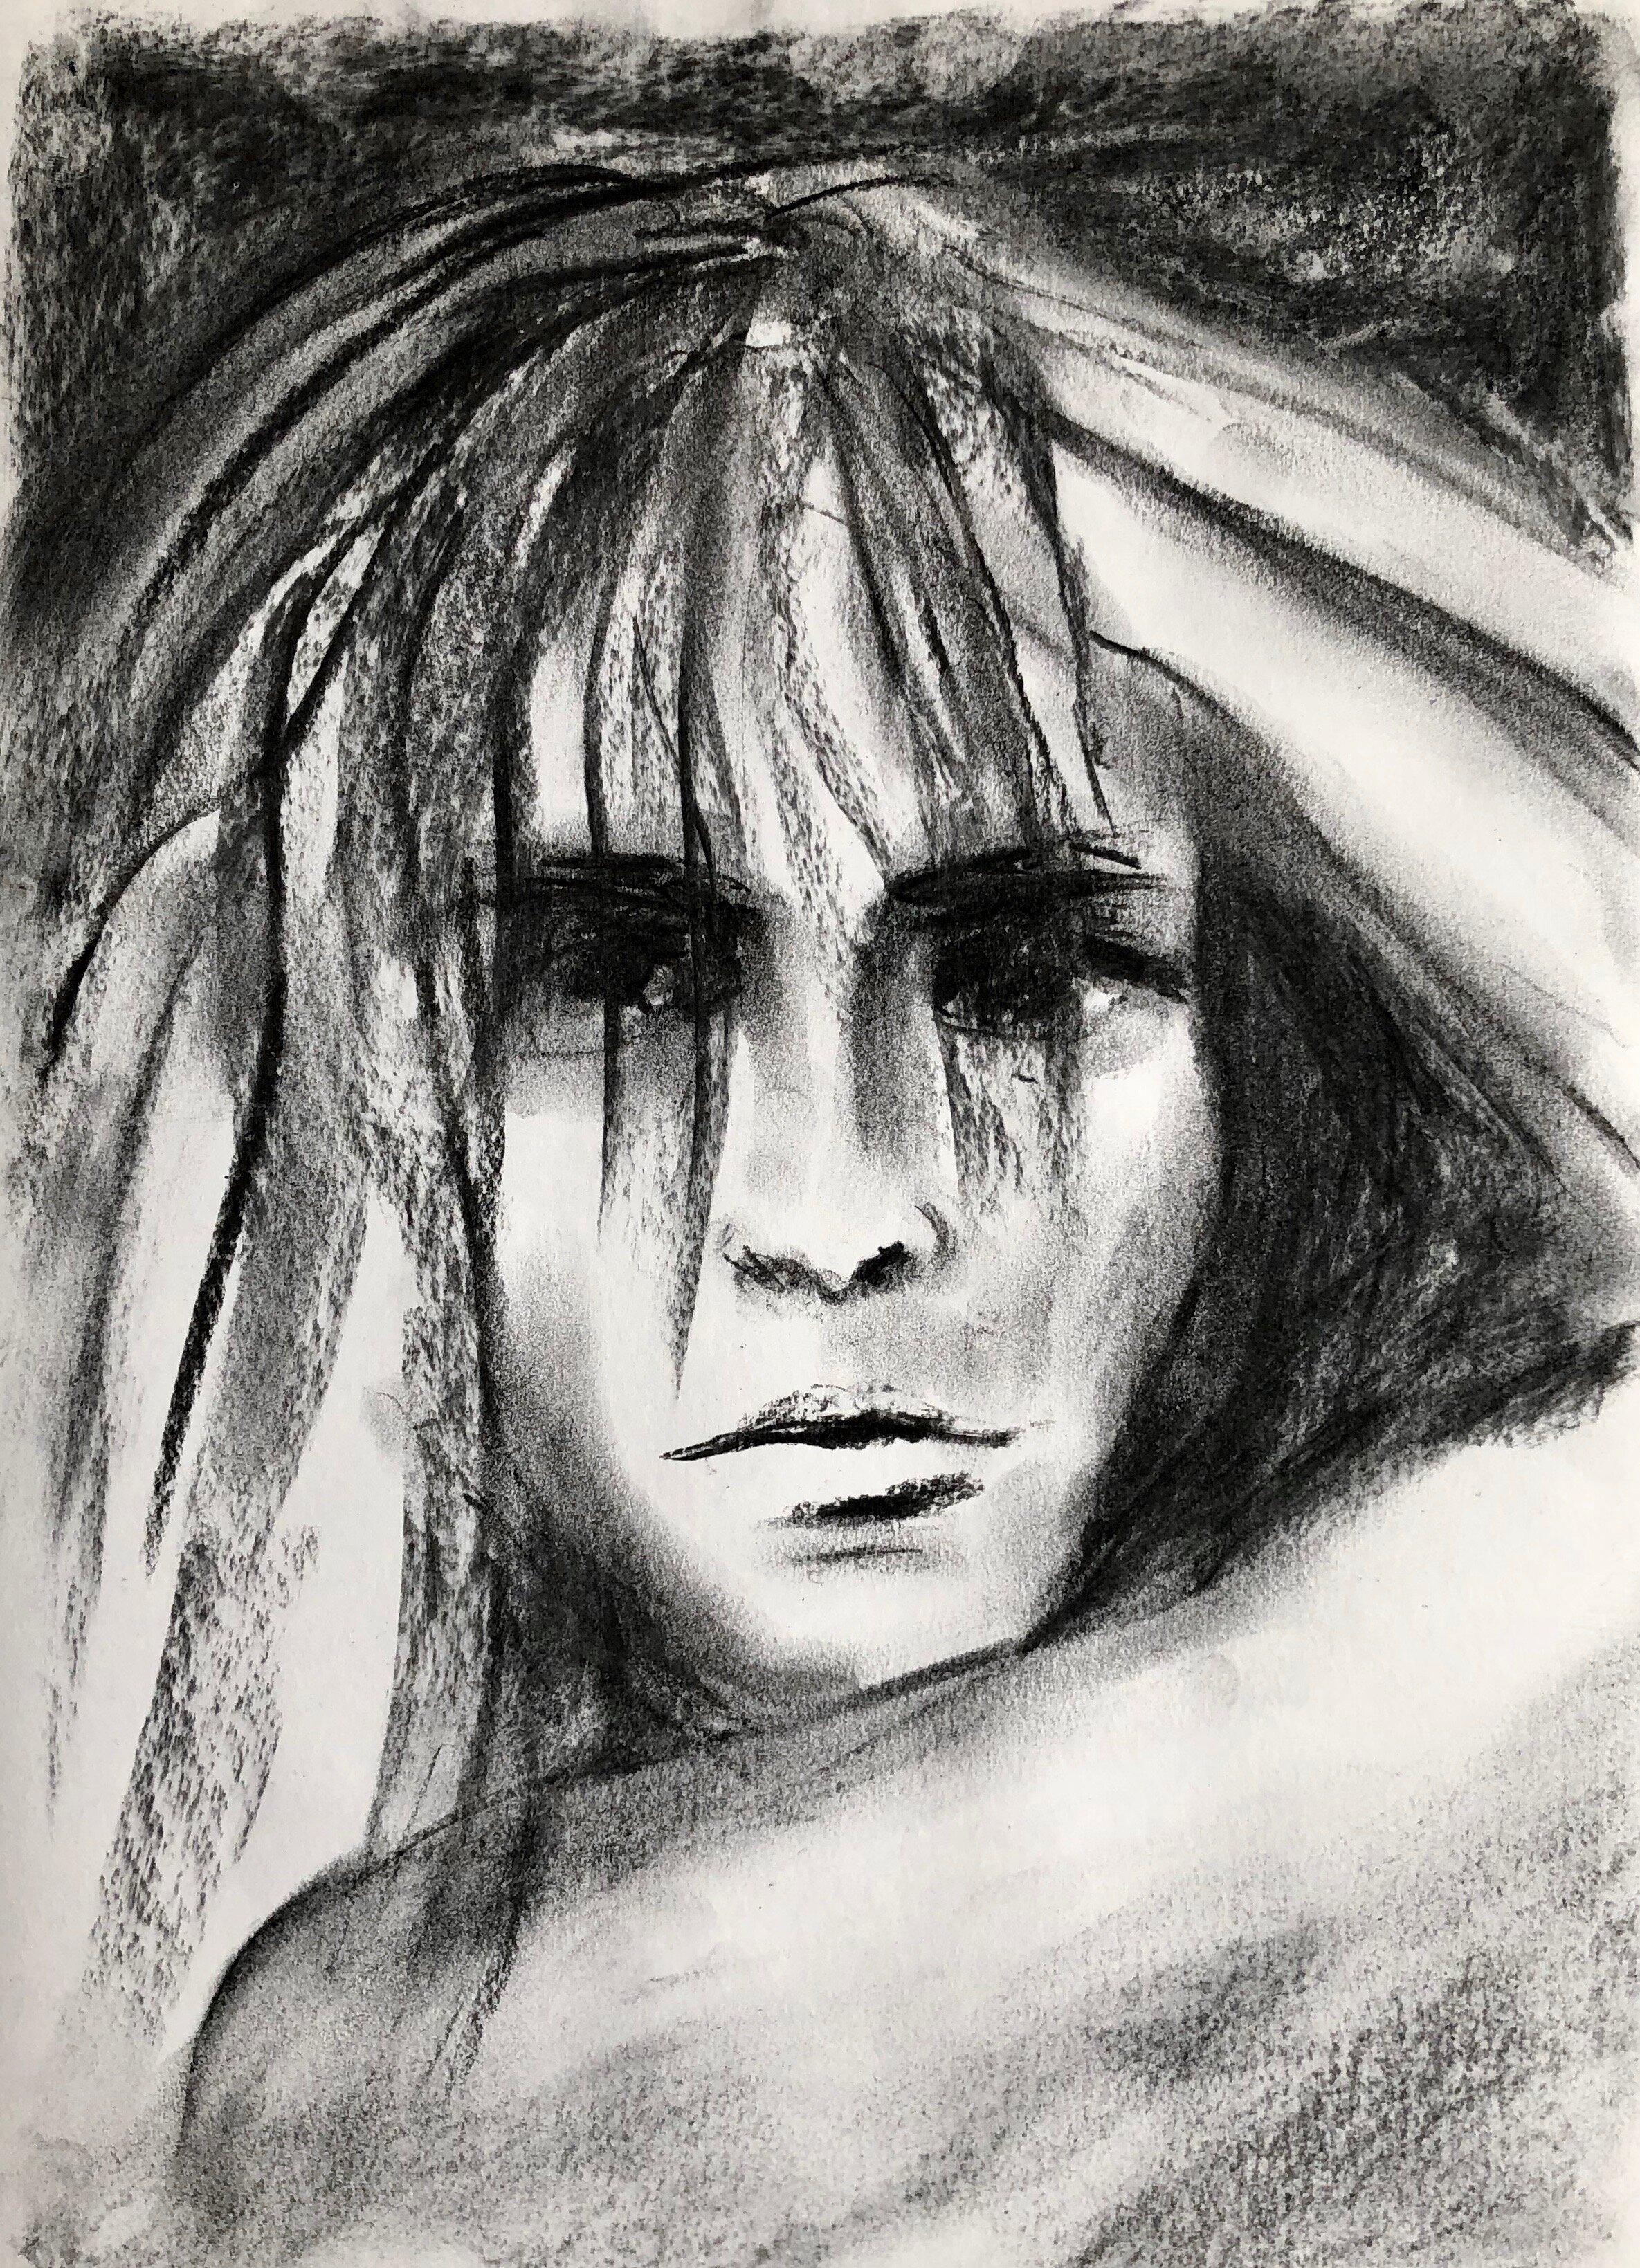  FACE ME, 2019, charcoal on paper, 40x30cm 